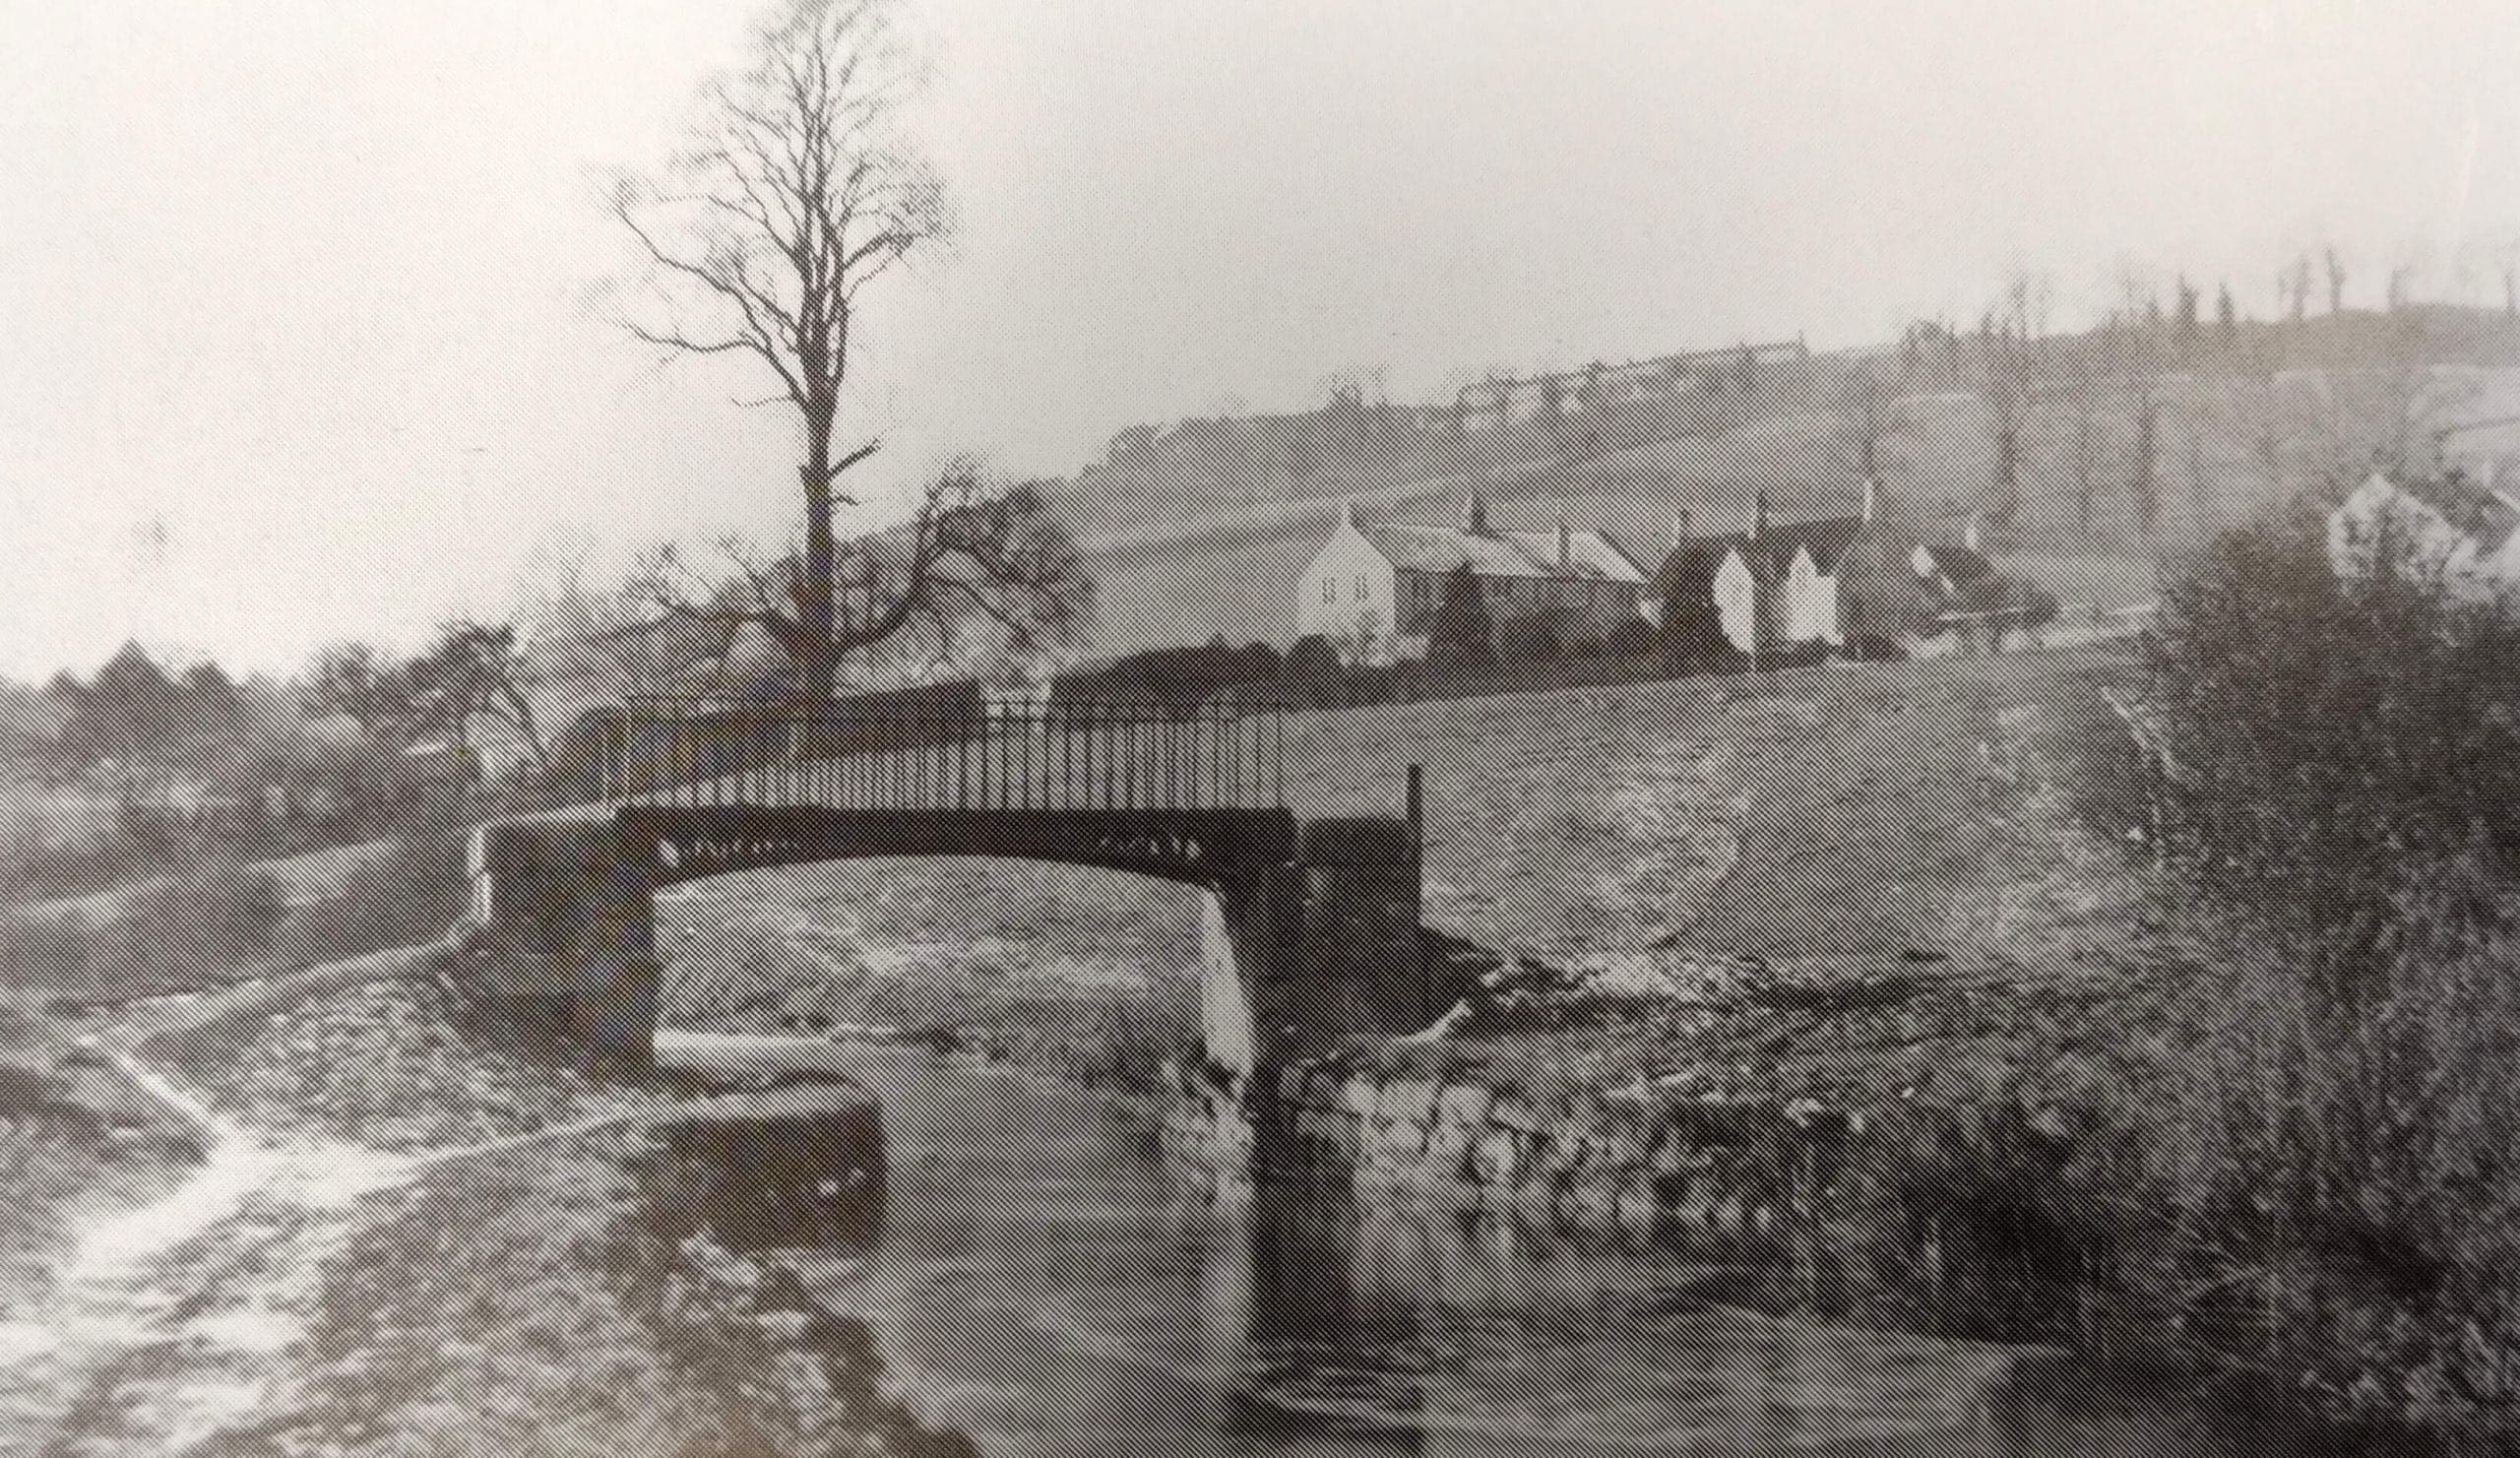 Monkton Combe in about 1912